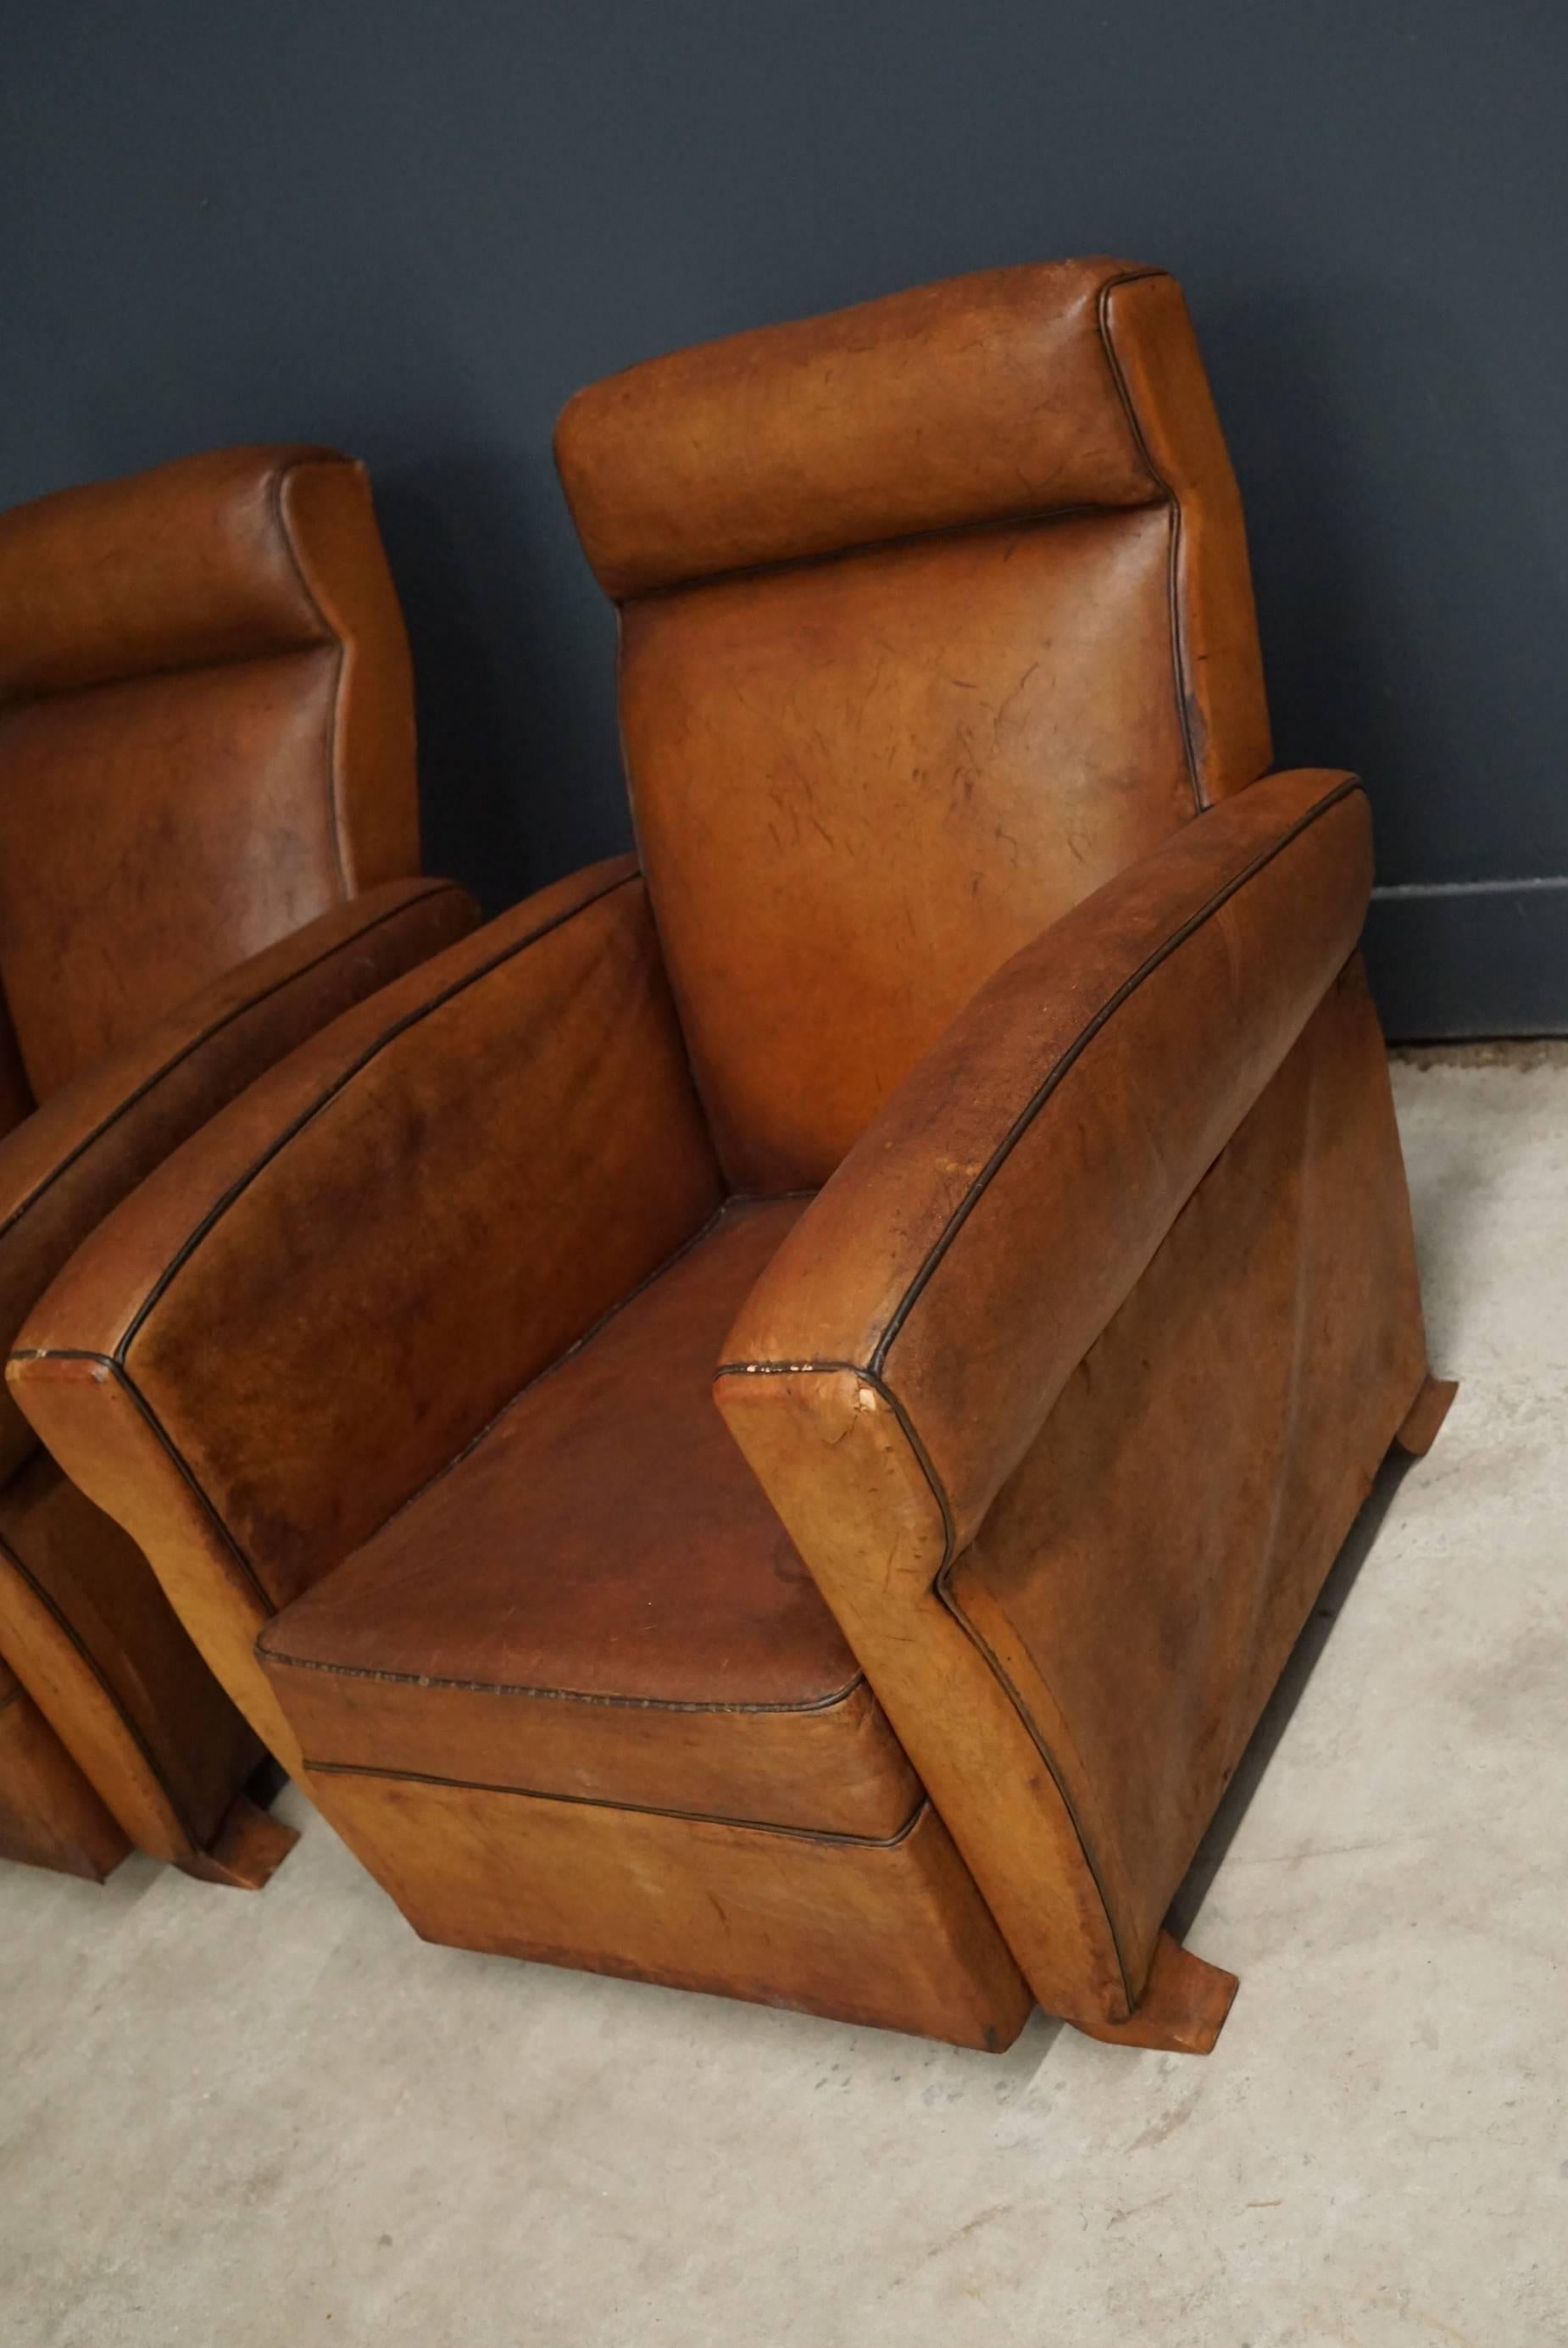 Pair of French Cognac Leather Club Chairs, 1940s (Leder)